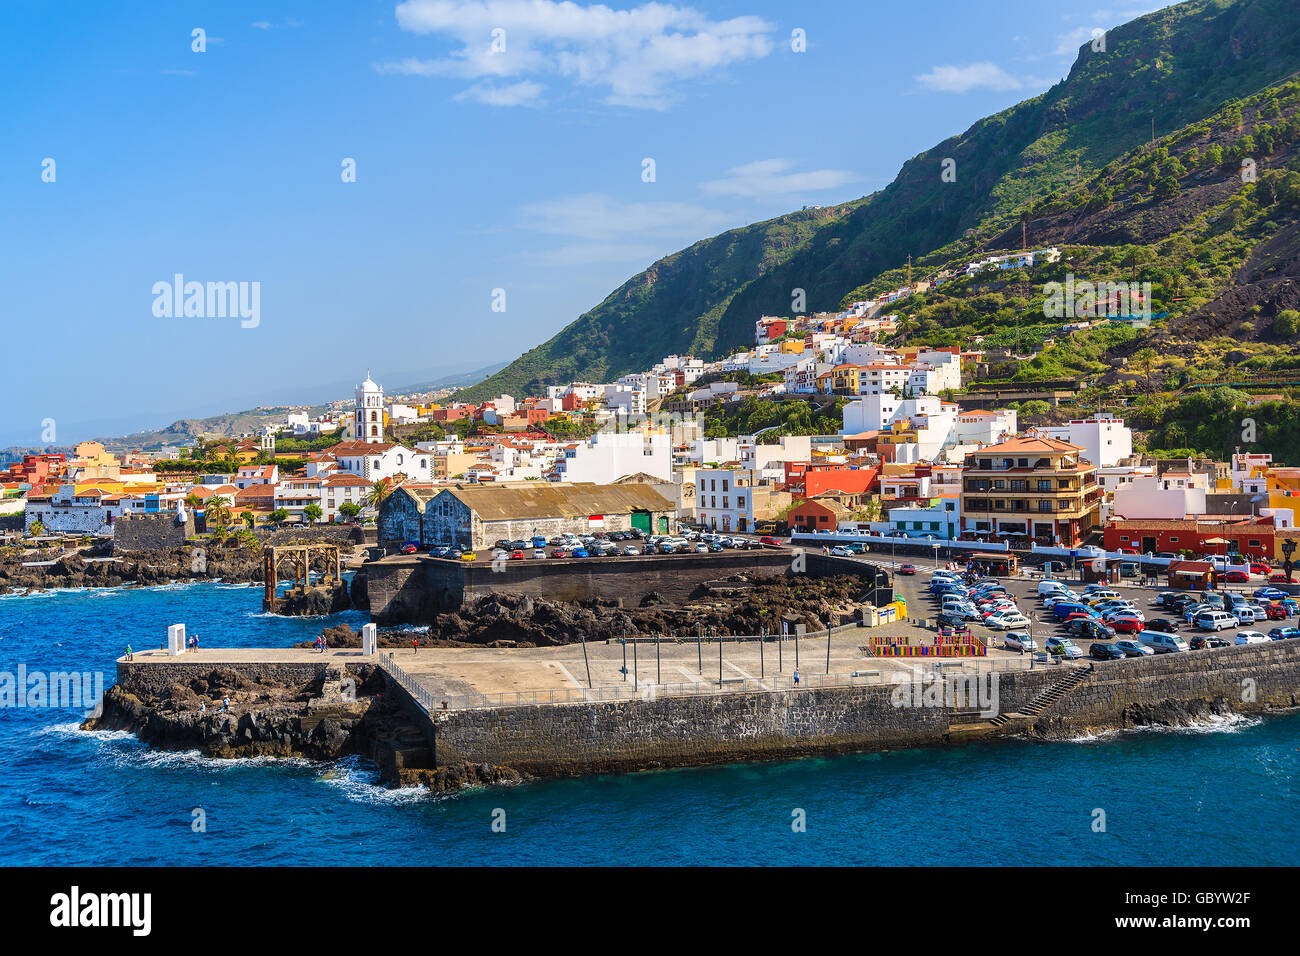 A view of Garachico town on coast of Tenerife, Canary Islands, Spain Stock Photo